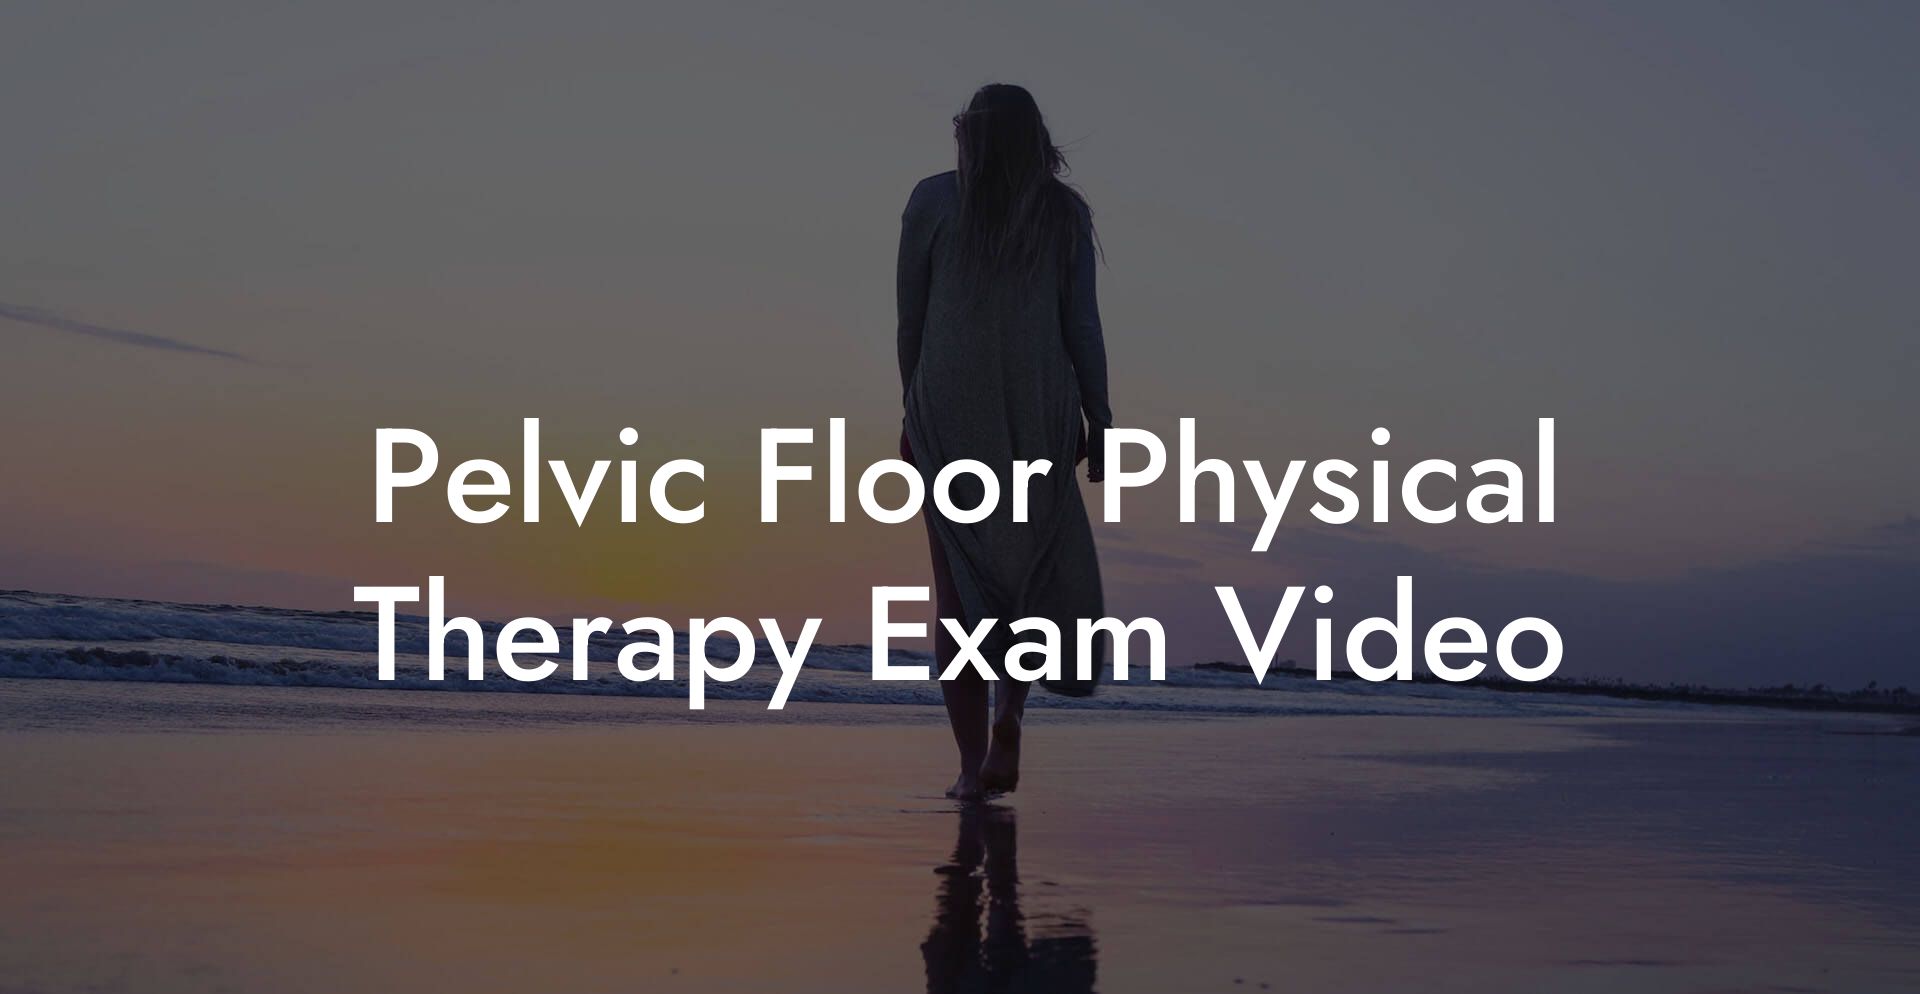 Pelvic Floor Physical Therapy Exam Video